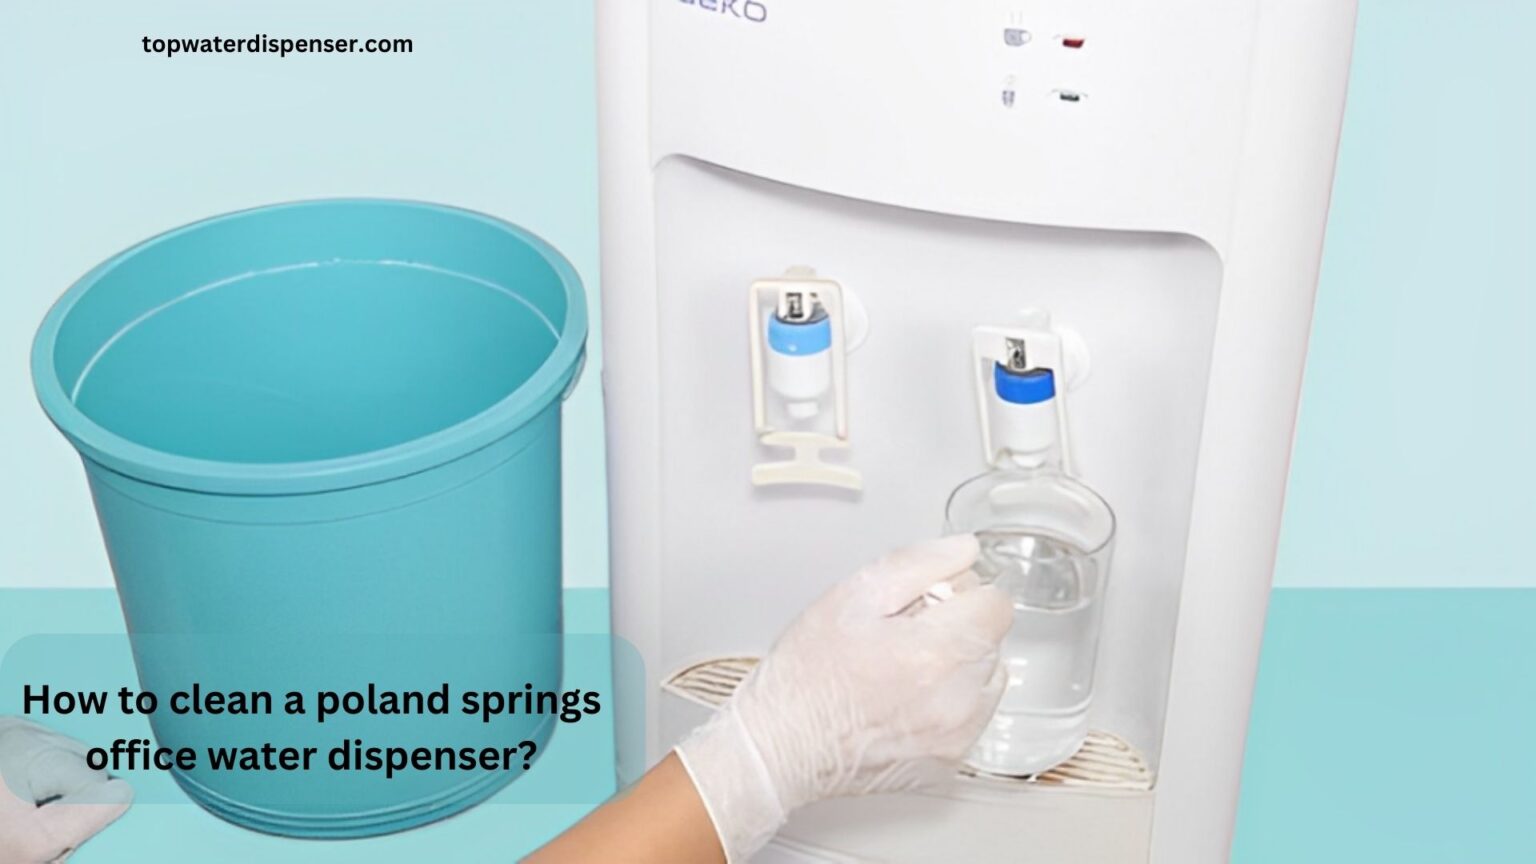 How to clean a poland springs office water dispenser?